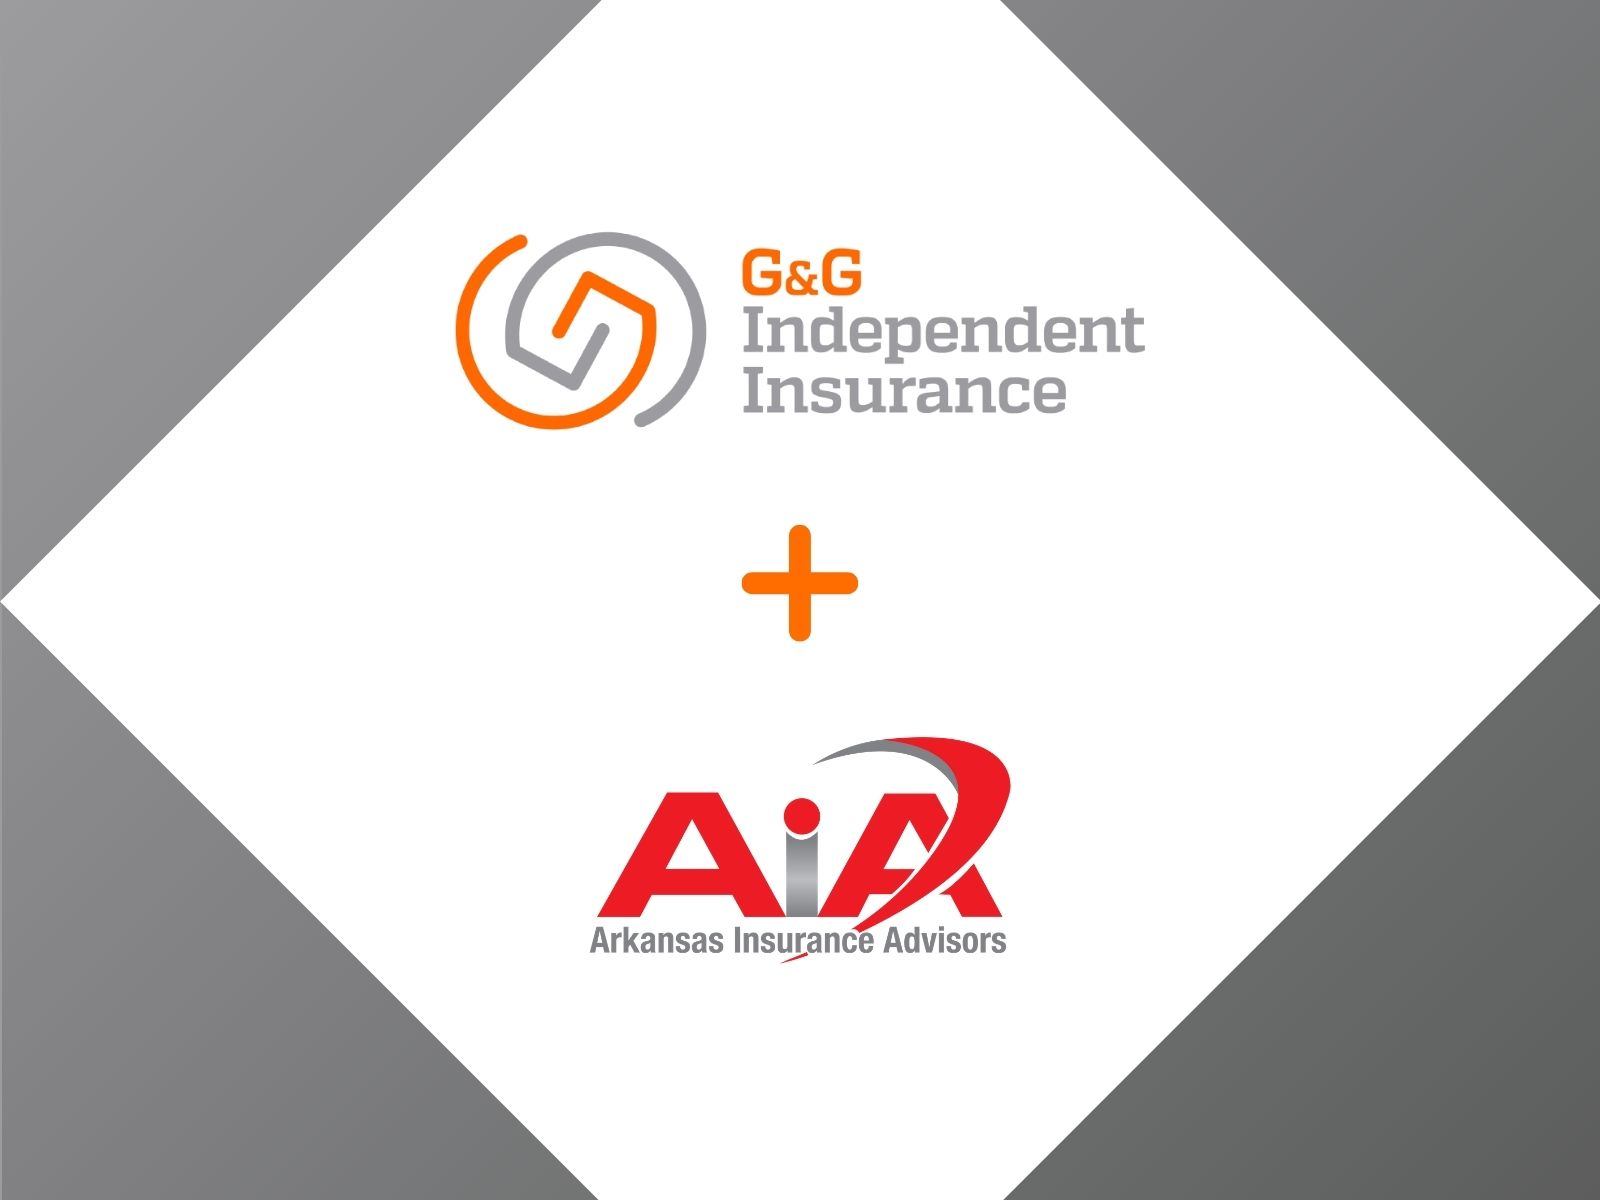 acquisition, AIA, GG Independent Insurance